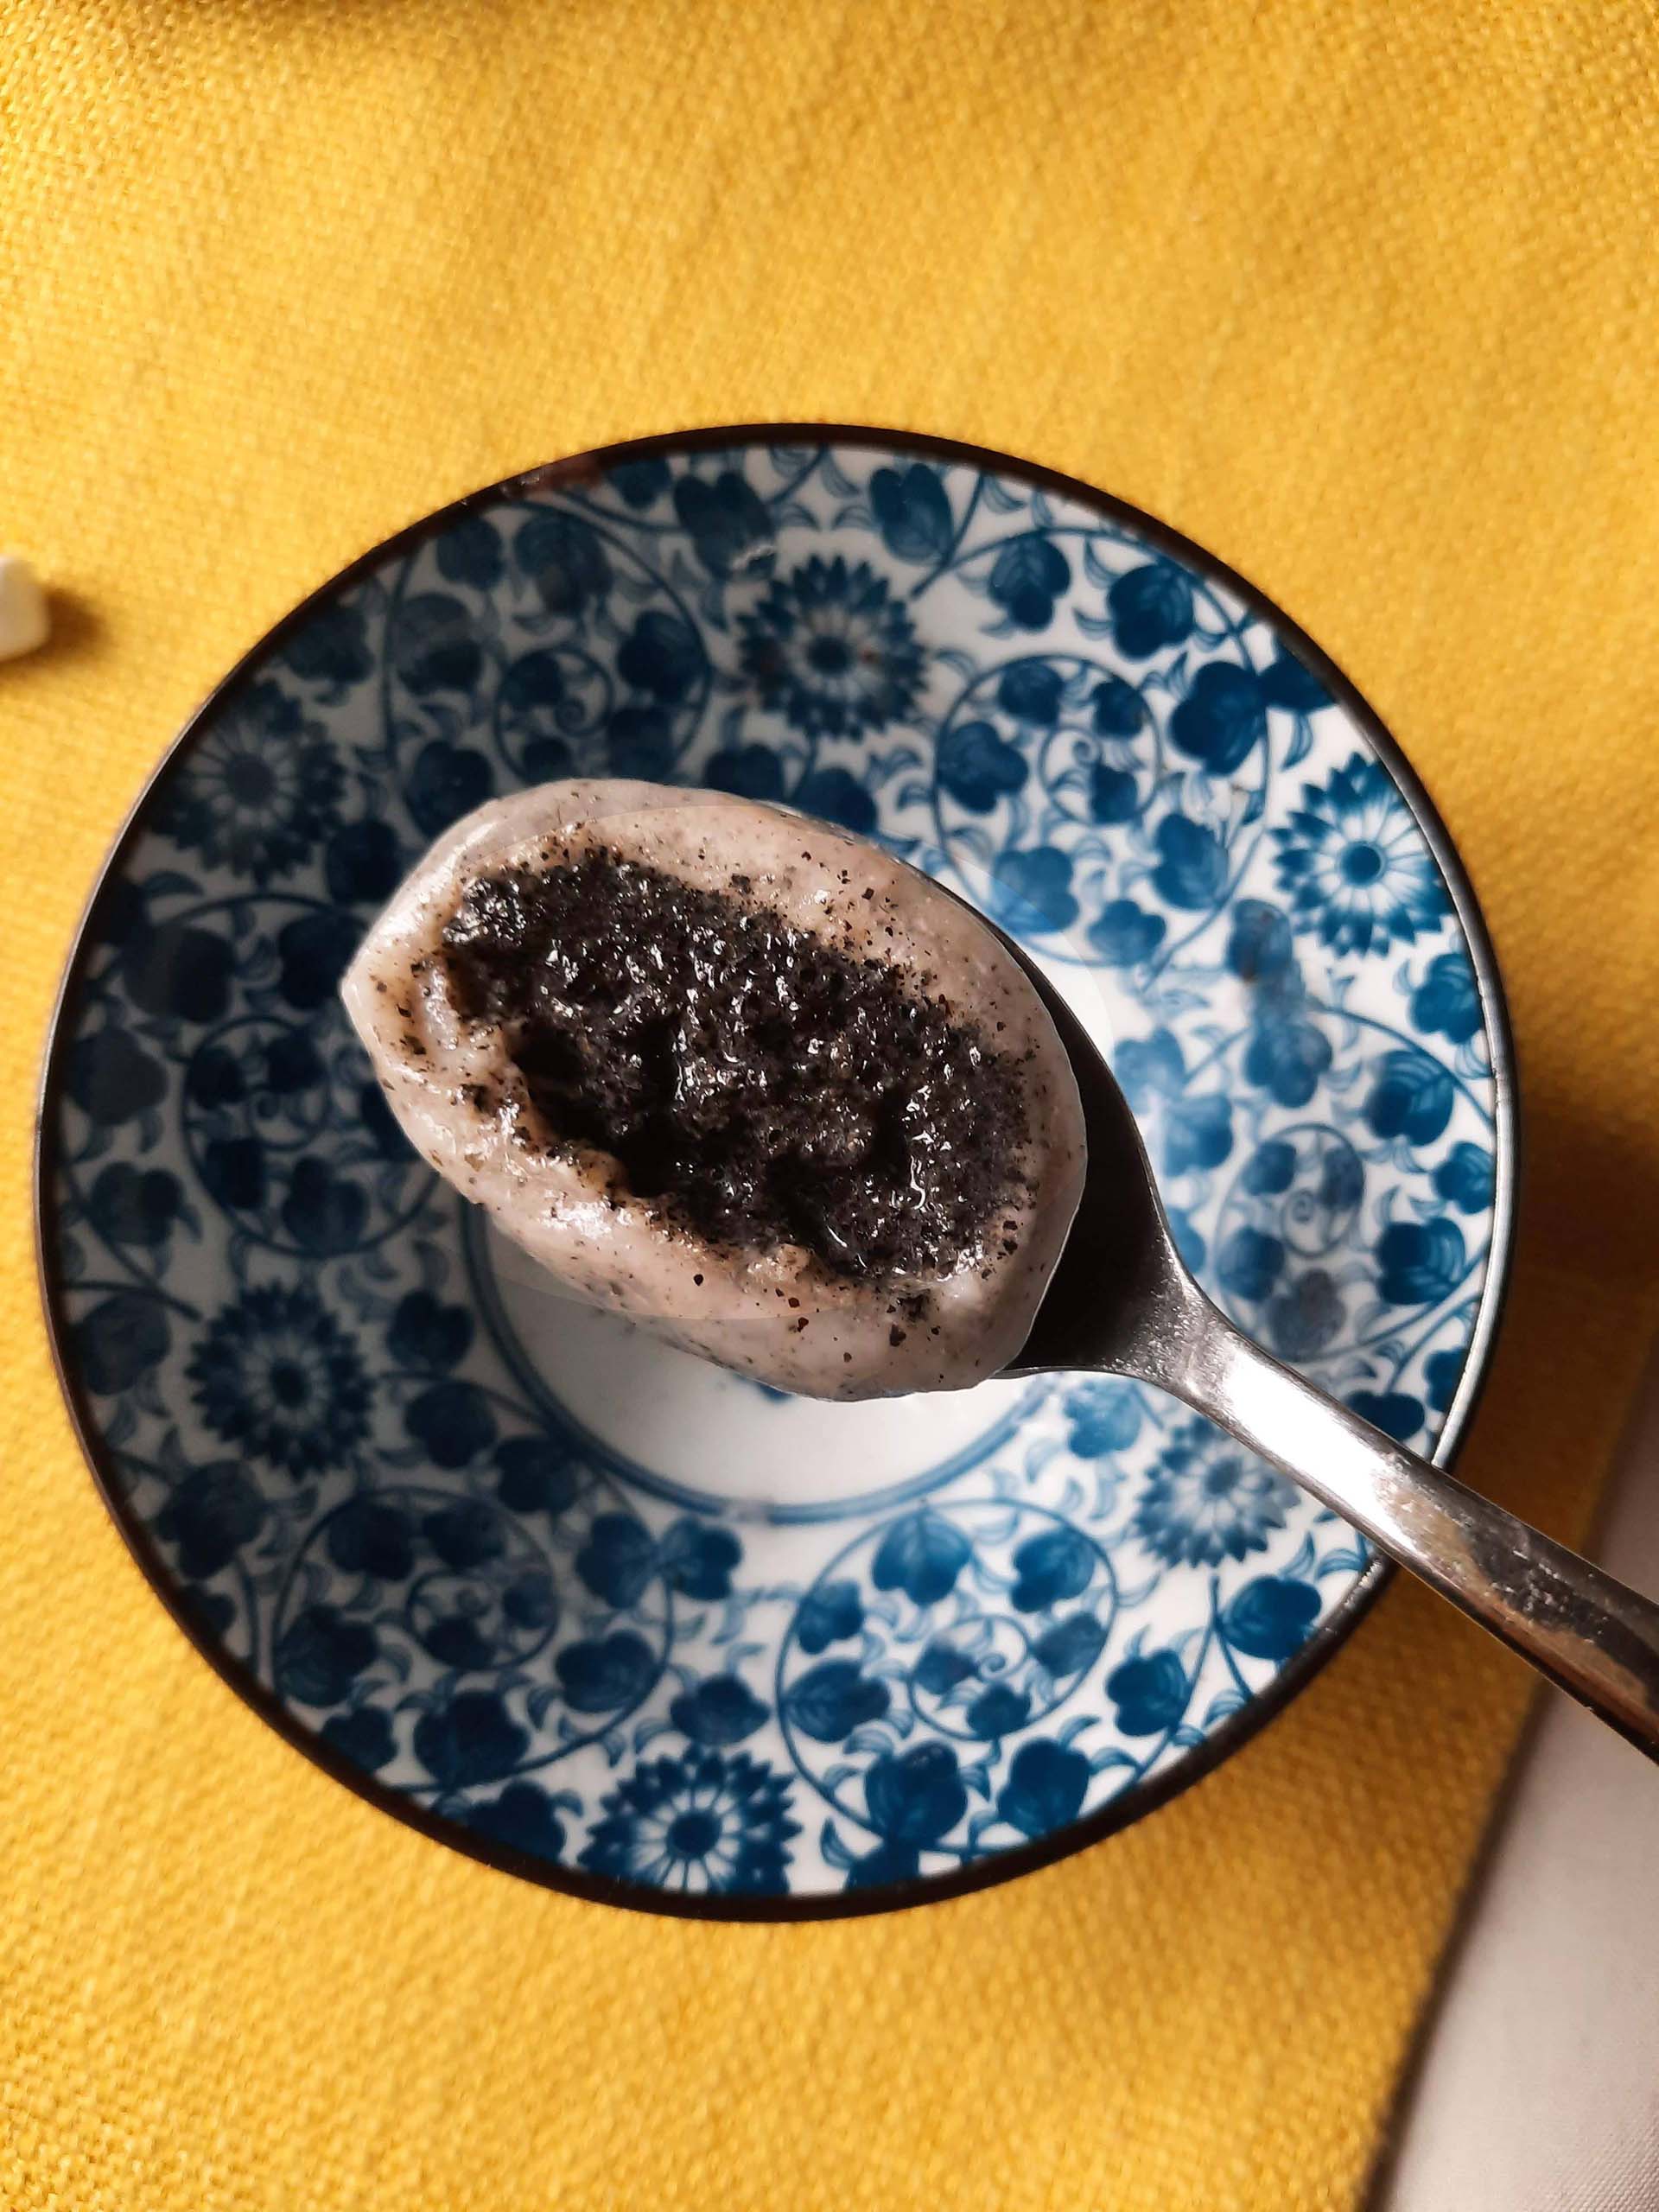 Cross section of a tangyuan (glutinous rice ball) on a spoon, with the black sesame filling visible.